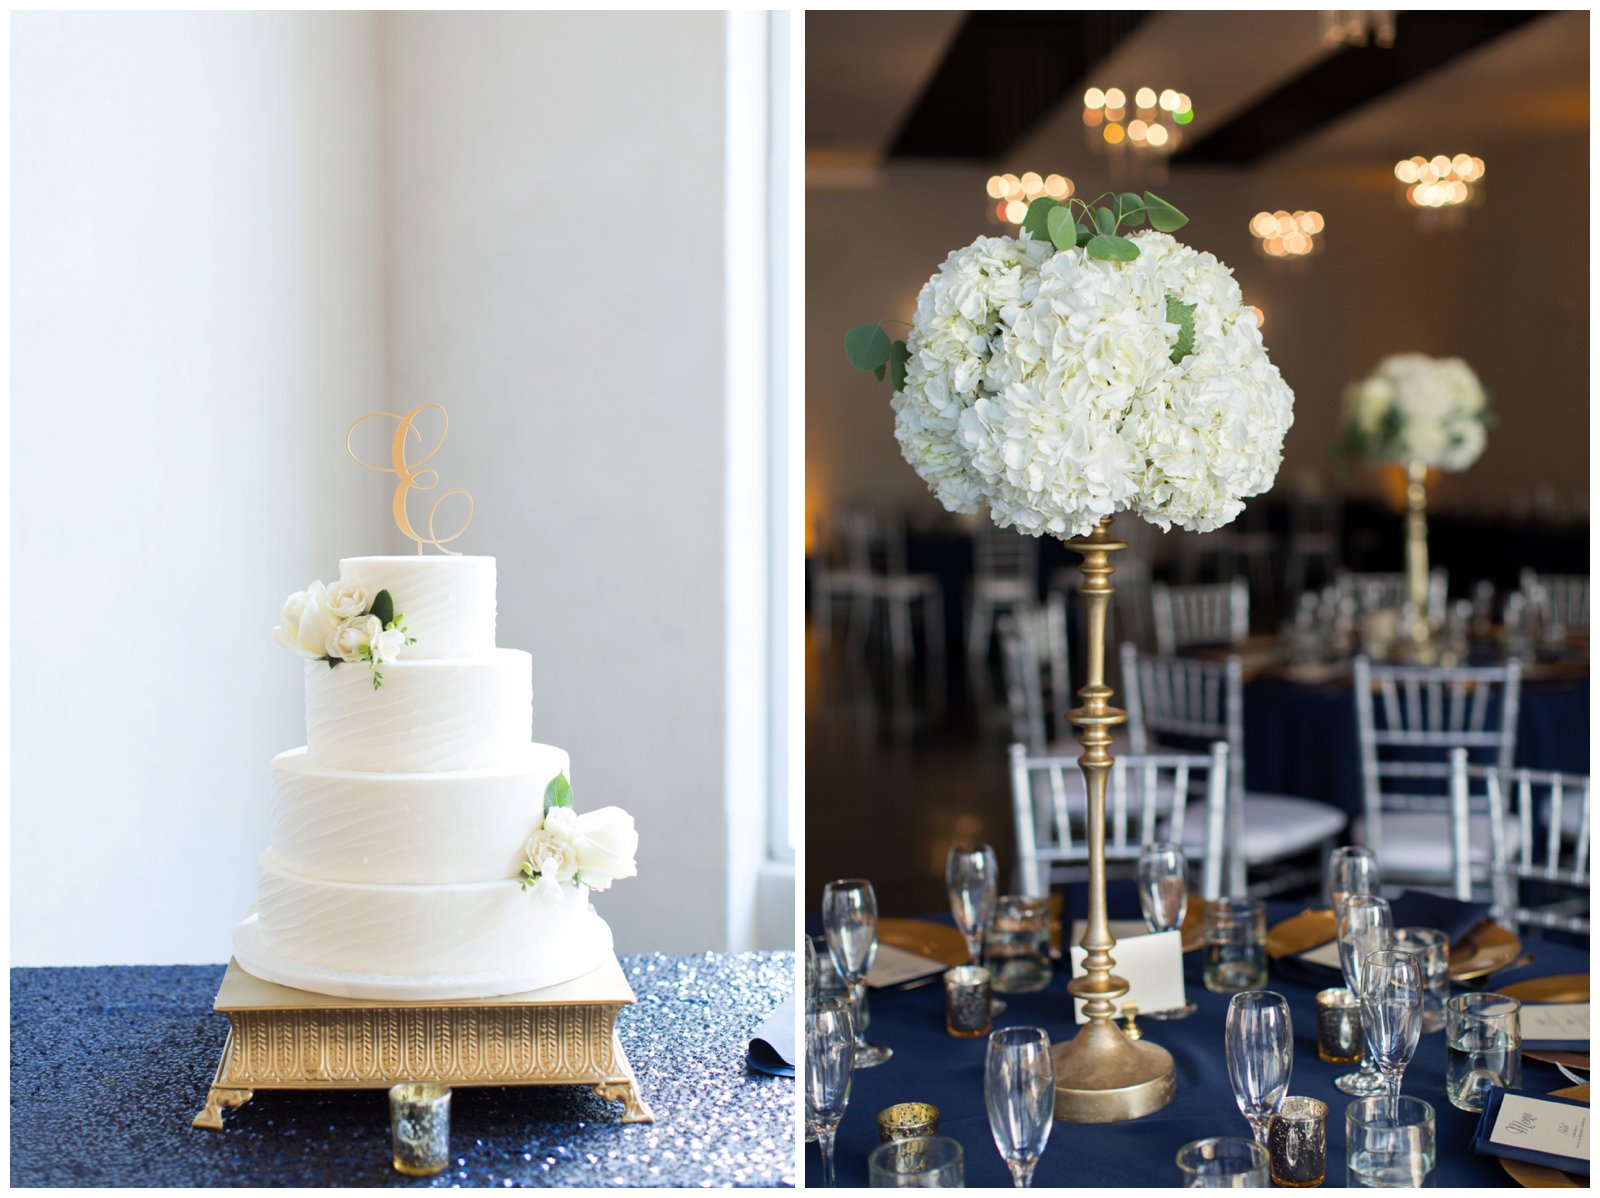 White floral themed wedding cake and table decorations